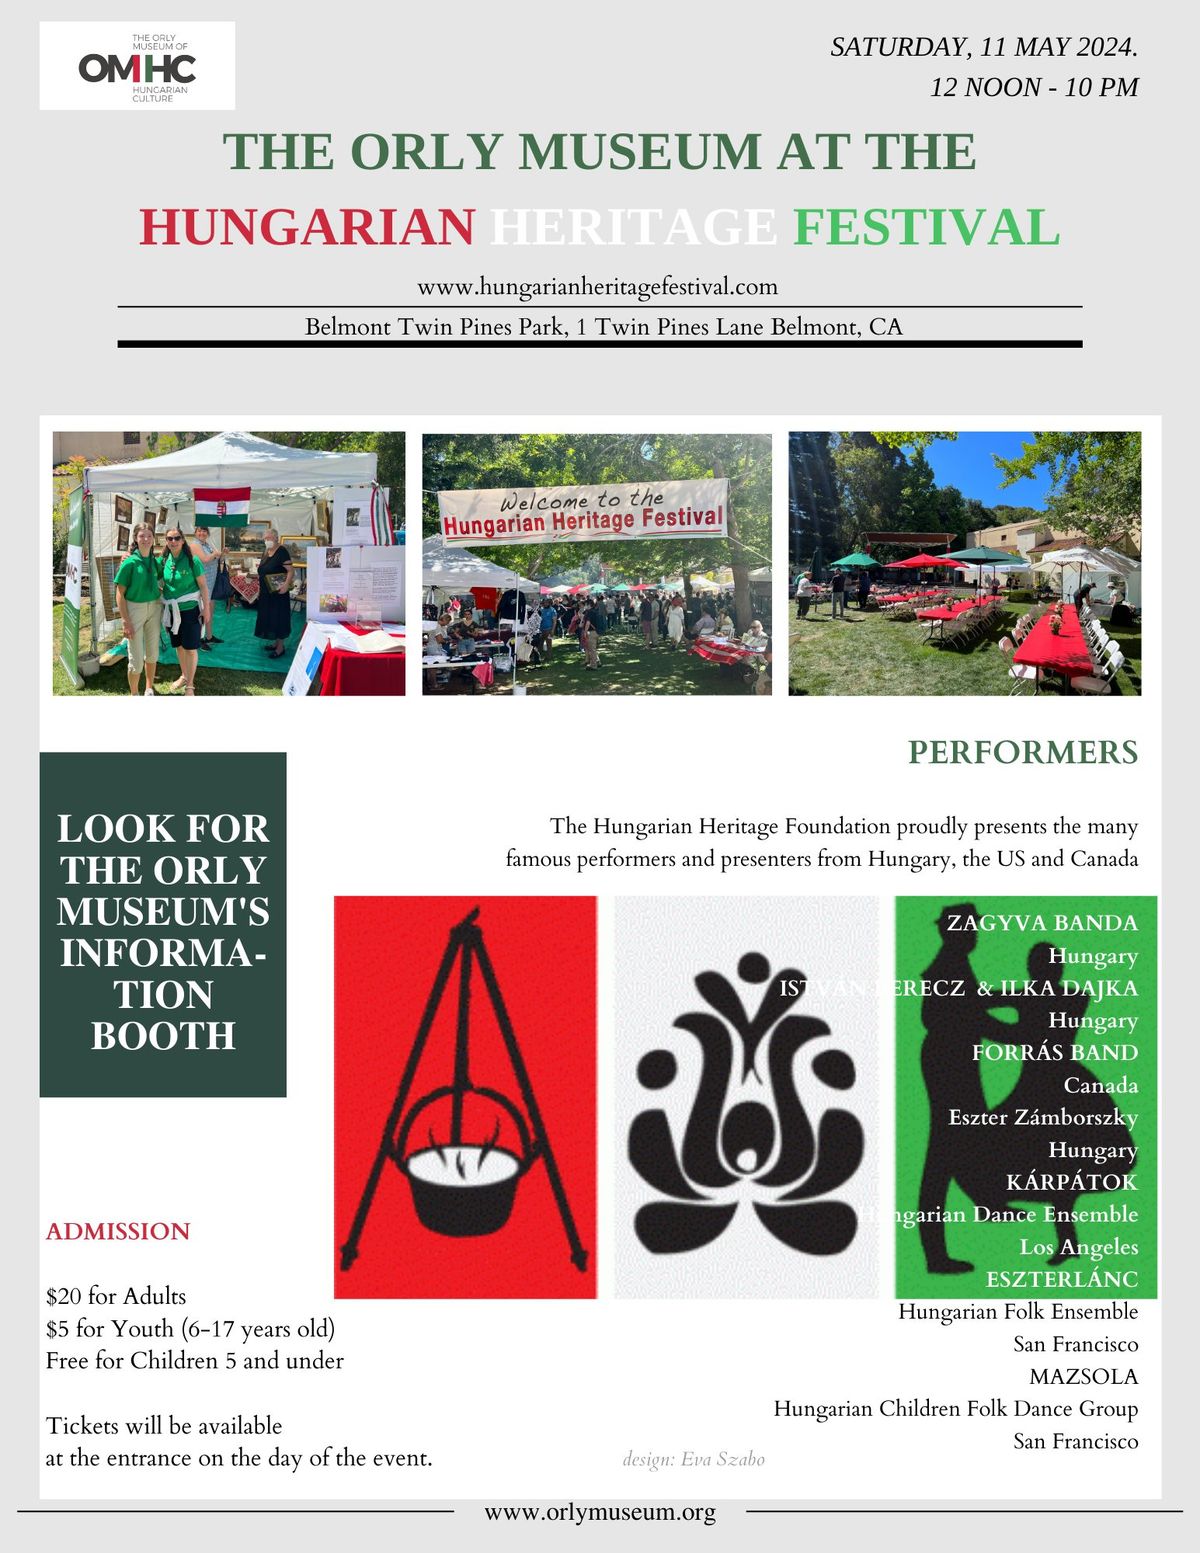 The Orly Museum at the Hungarian Heritage Festival